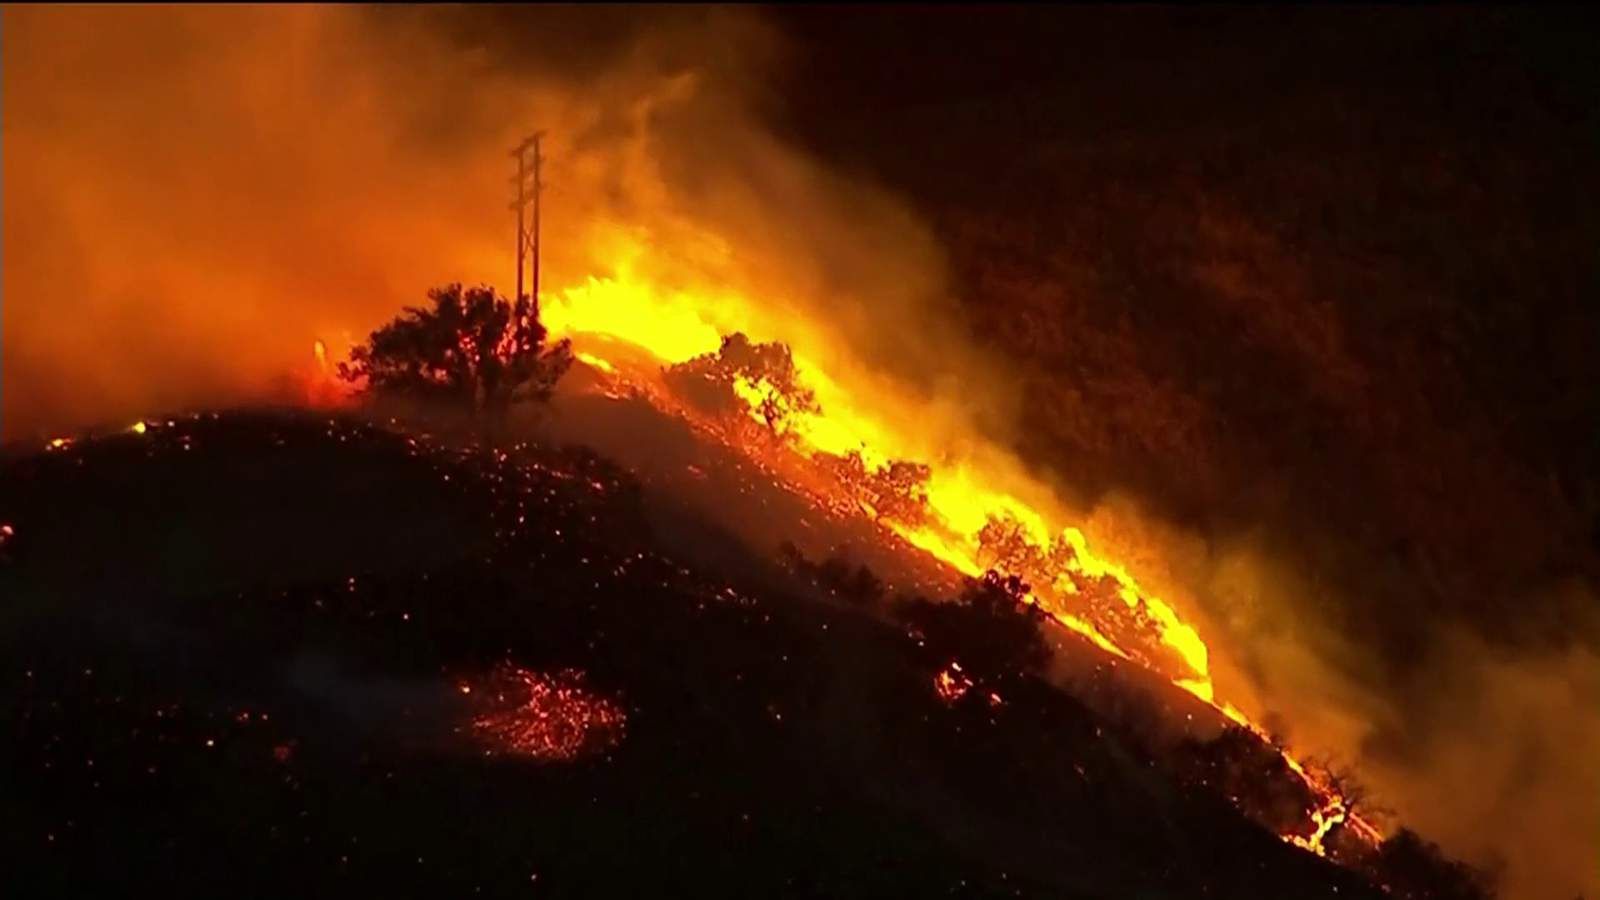 Hurricane-force winds stoke Southern California wildfires